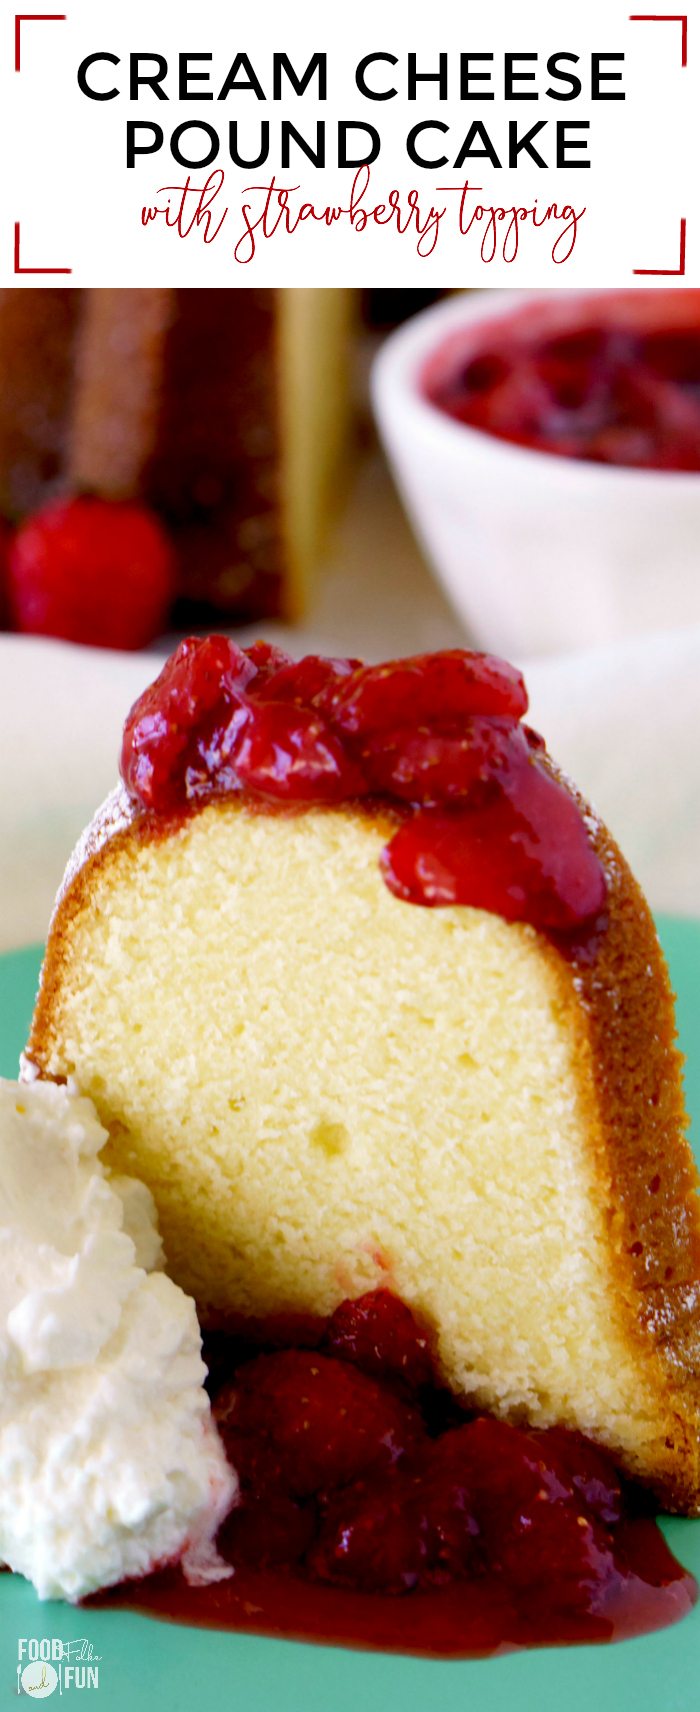 A close-up of Cream Cheese Pound Cake with Strawberry Topping